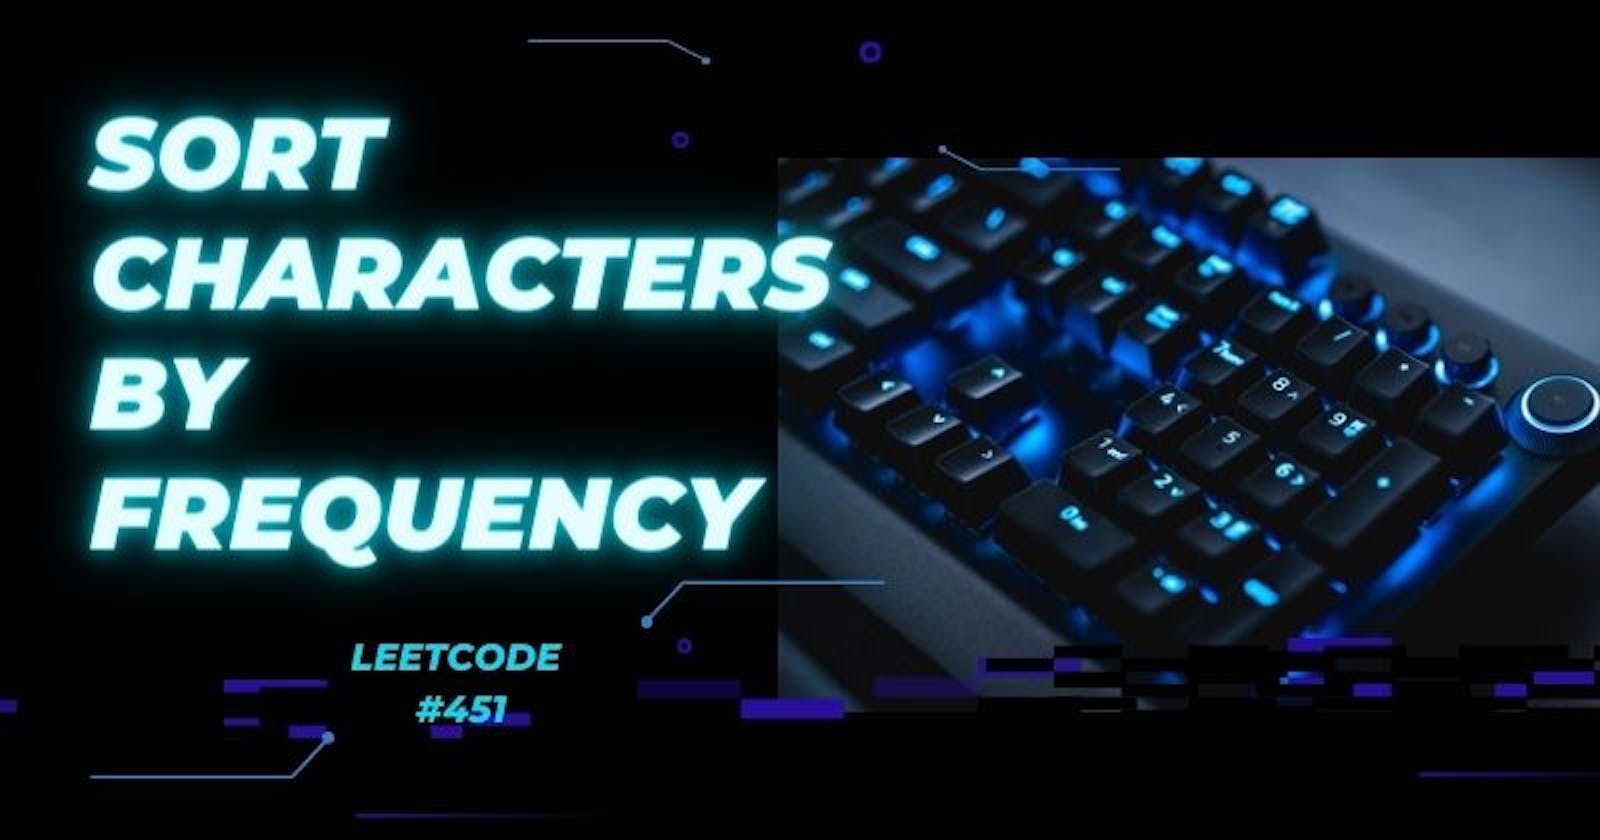 Sort Characters By Frequency - Leetcode #451